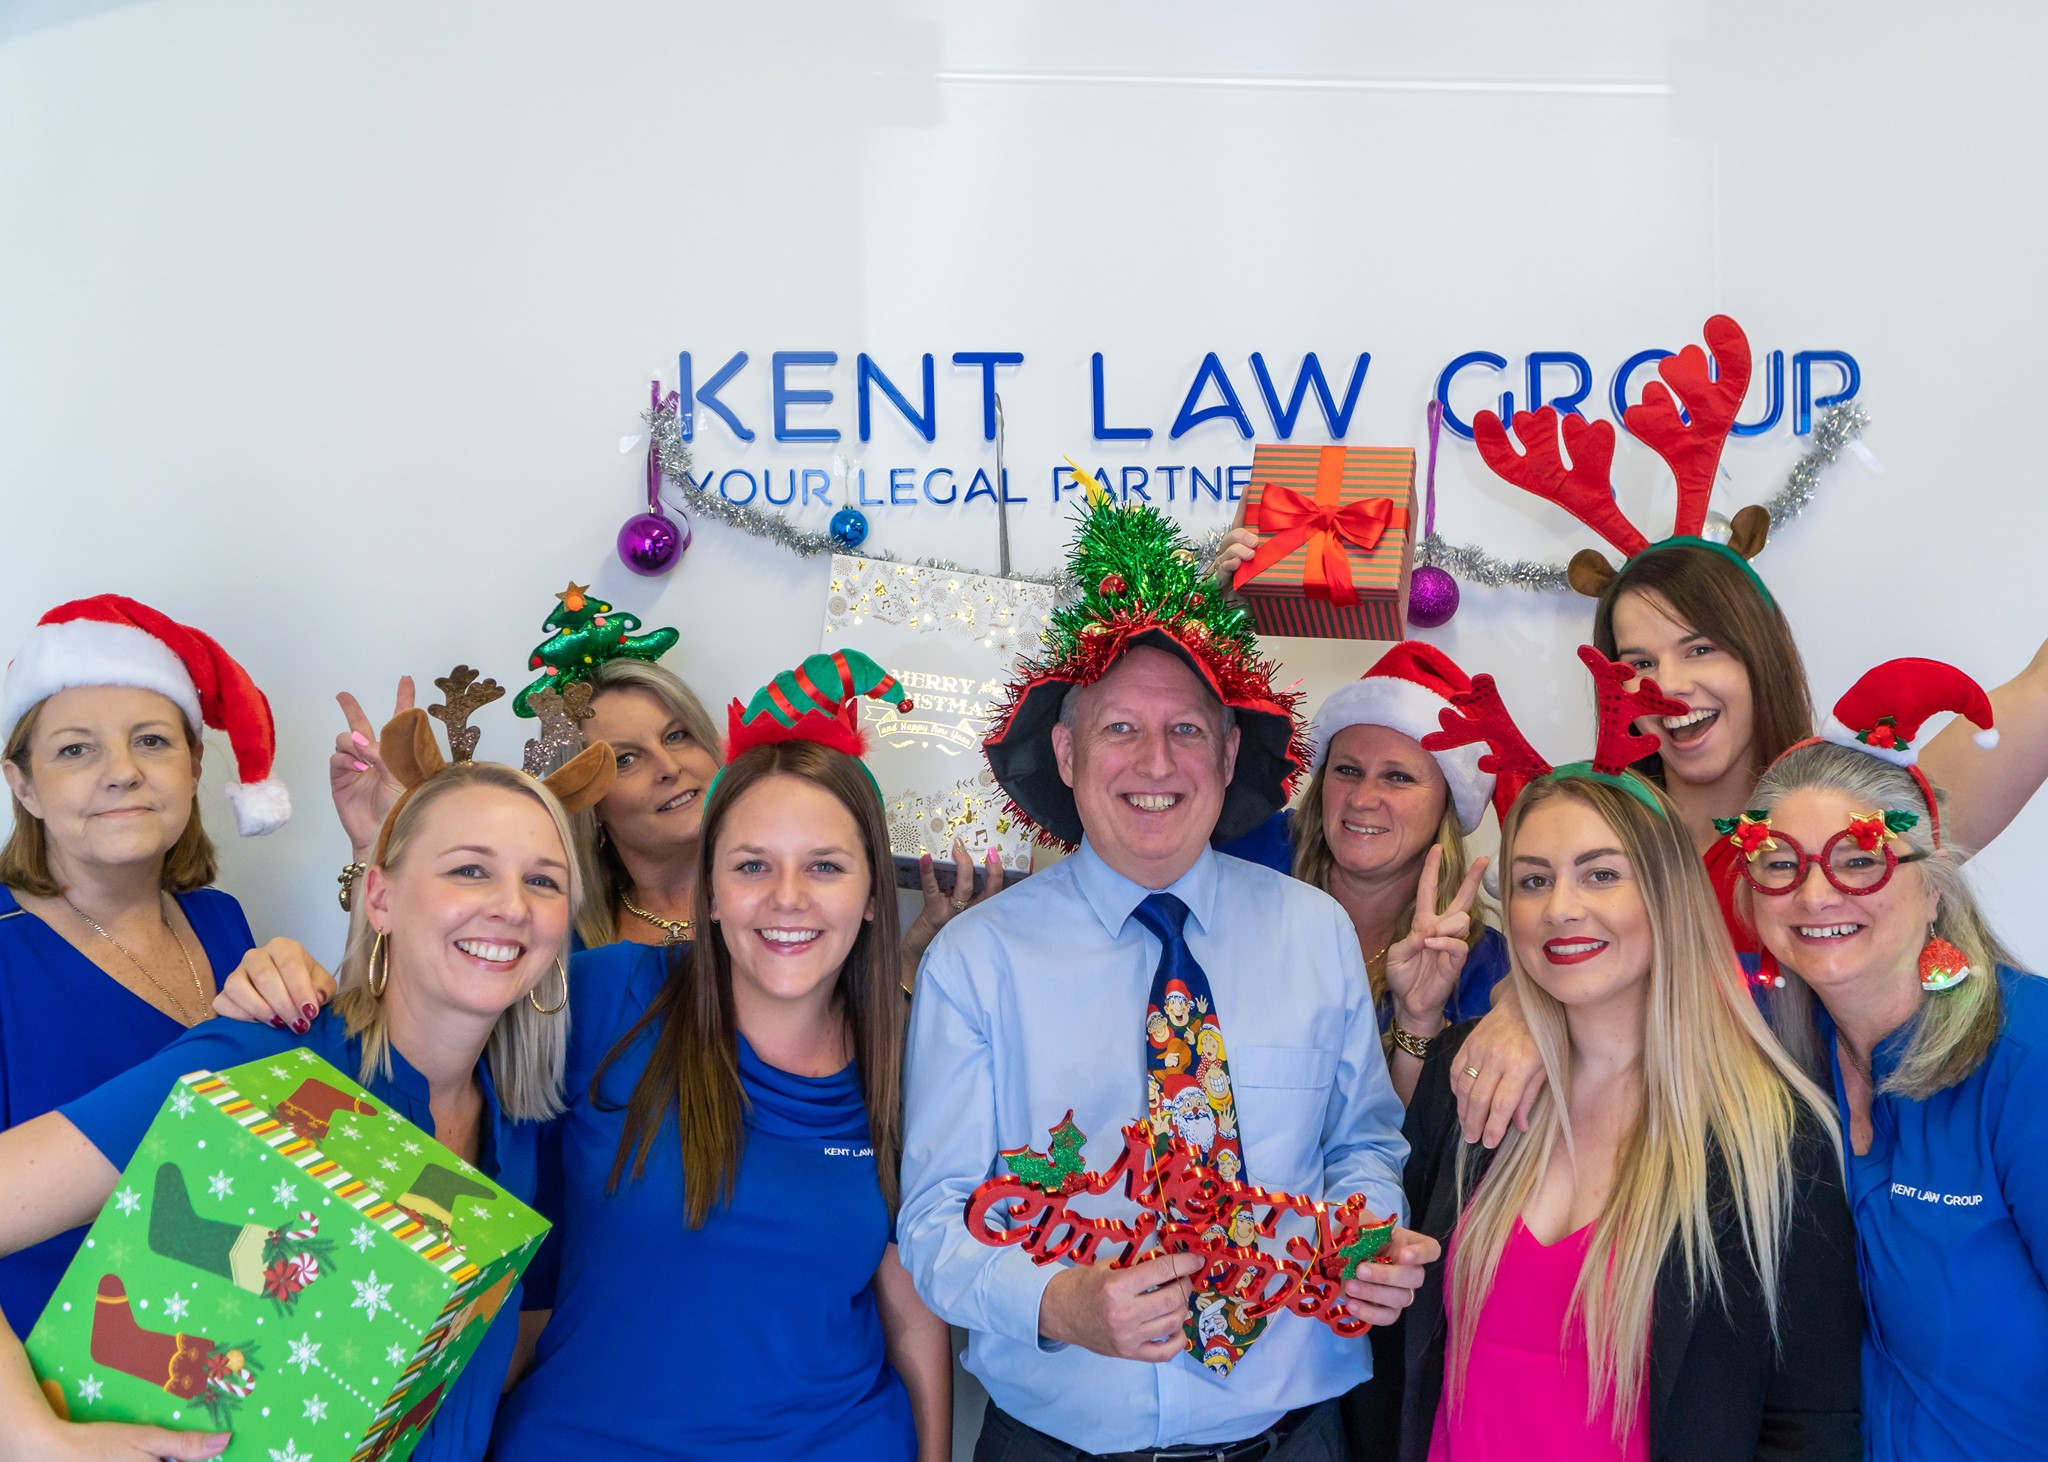 Kent Law Group